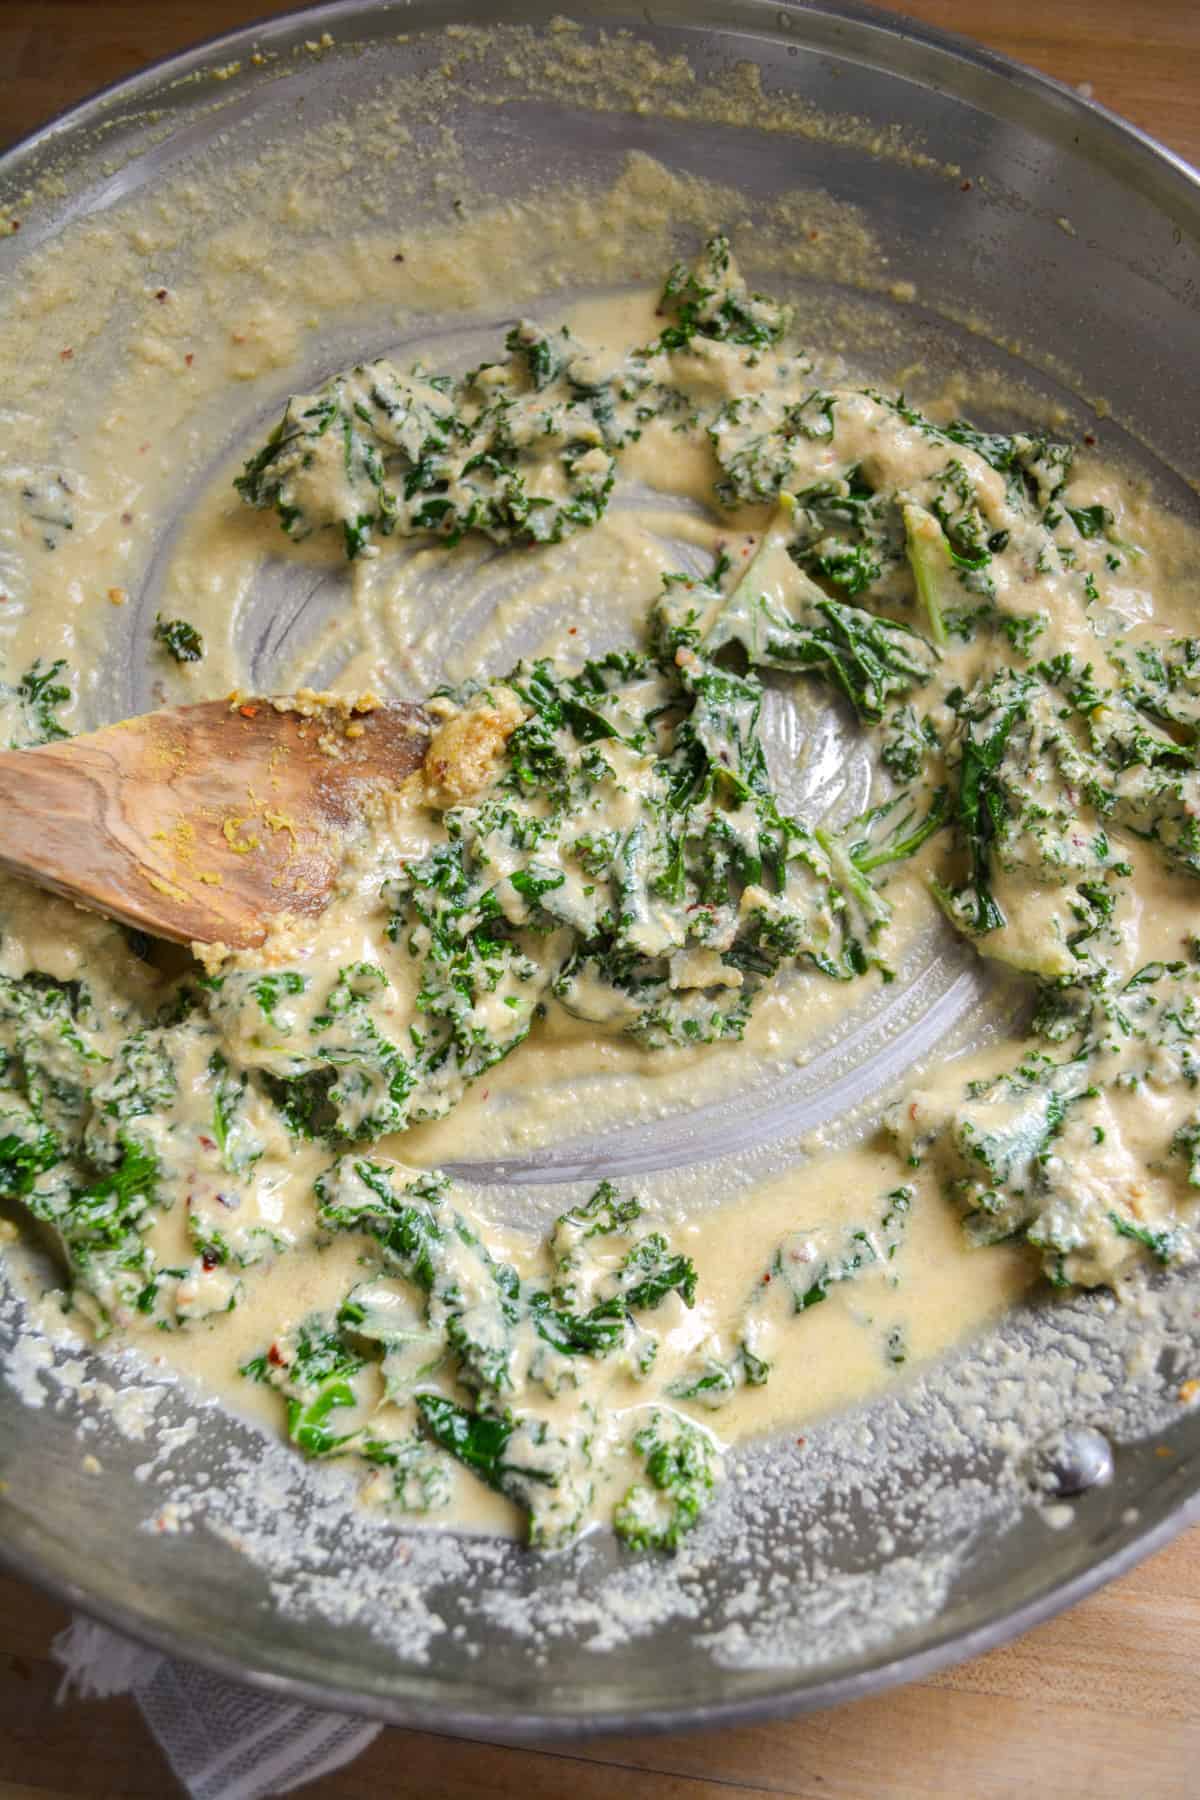 The creamy tahini sauce all stirred up with the kale in a skillet.